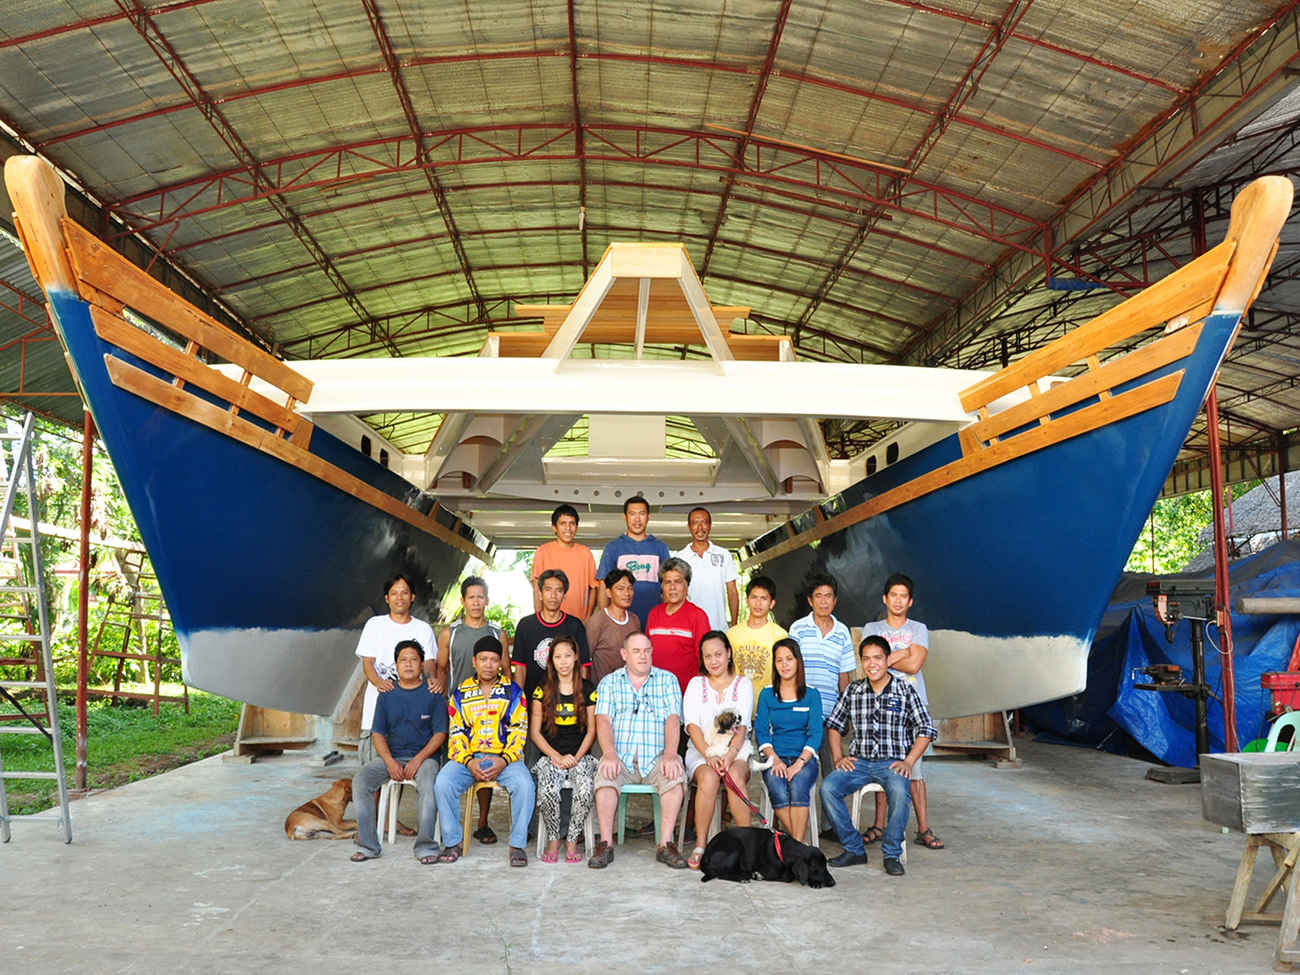 The Andy Smith Boatworks crew, posing for a photo under two large catamaran hulls